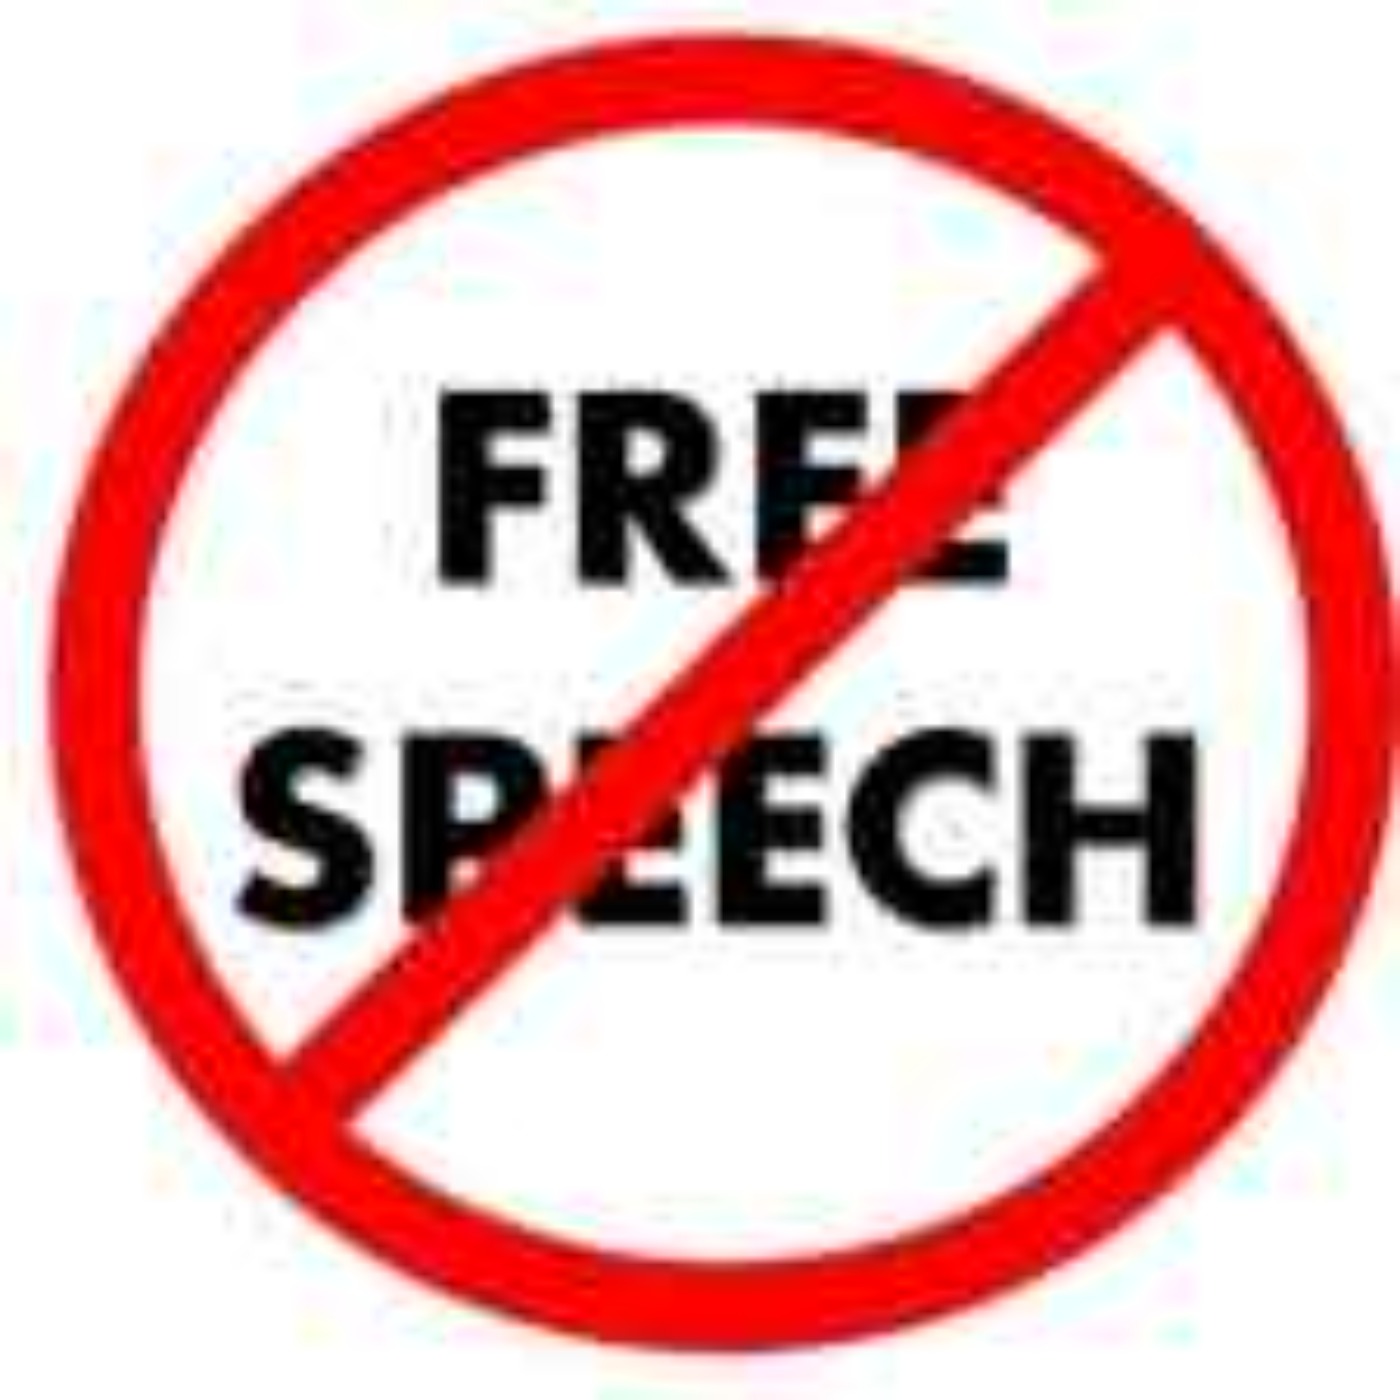 What freedom of speech